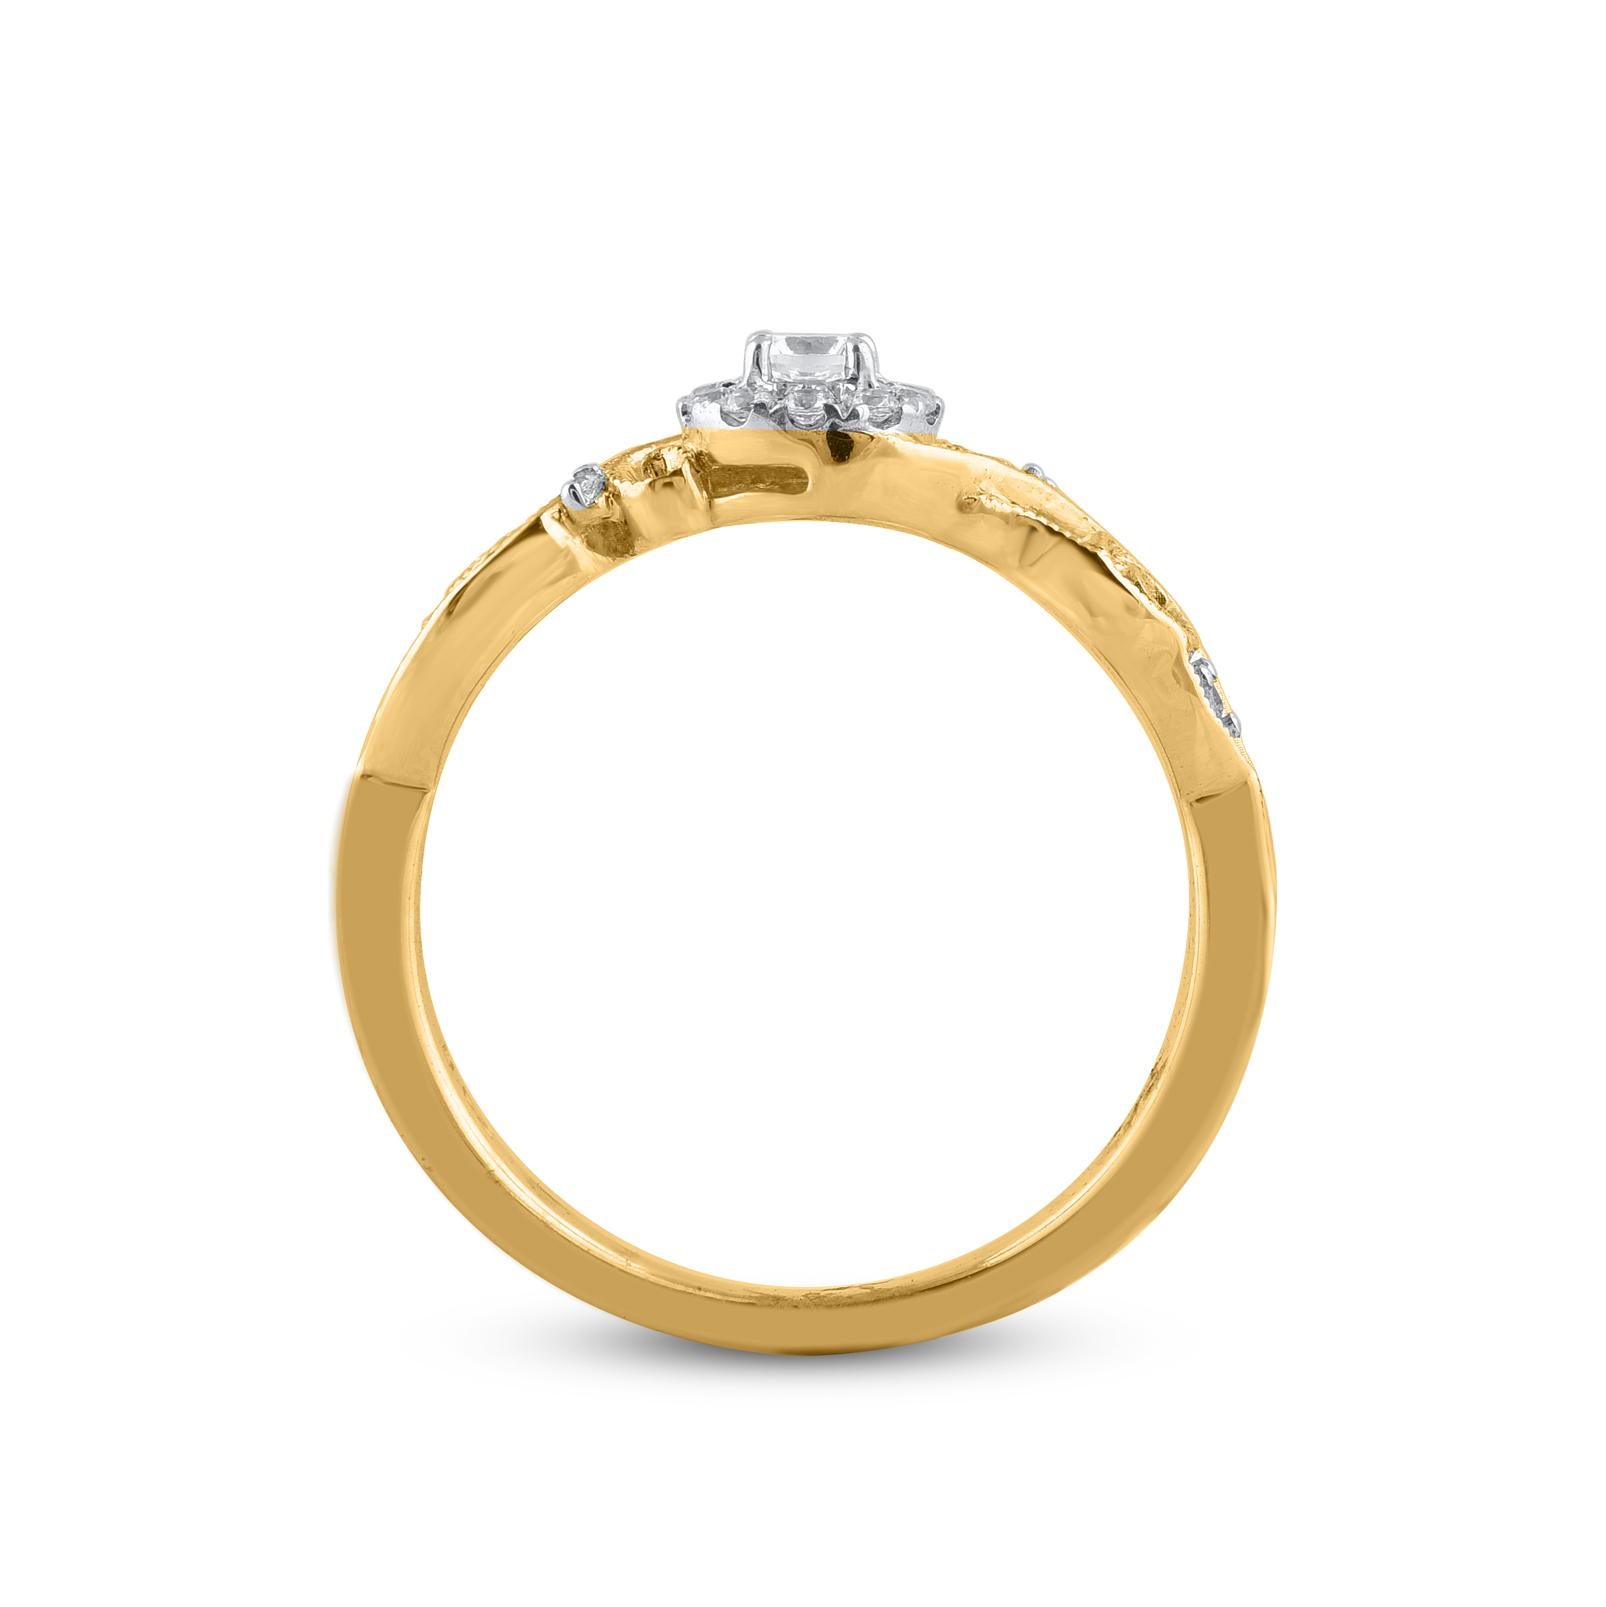 TJD 0.21 Carat Brilliant Cut Diamond 14KT Yellow Gold Vintage Engagement Ring In New Condition For Sale In New York, NY